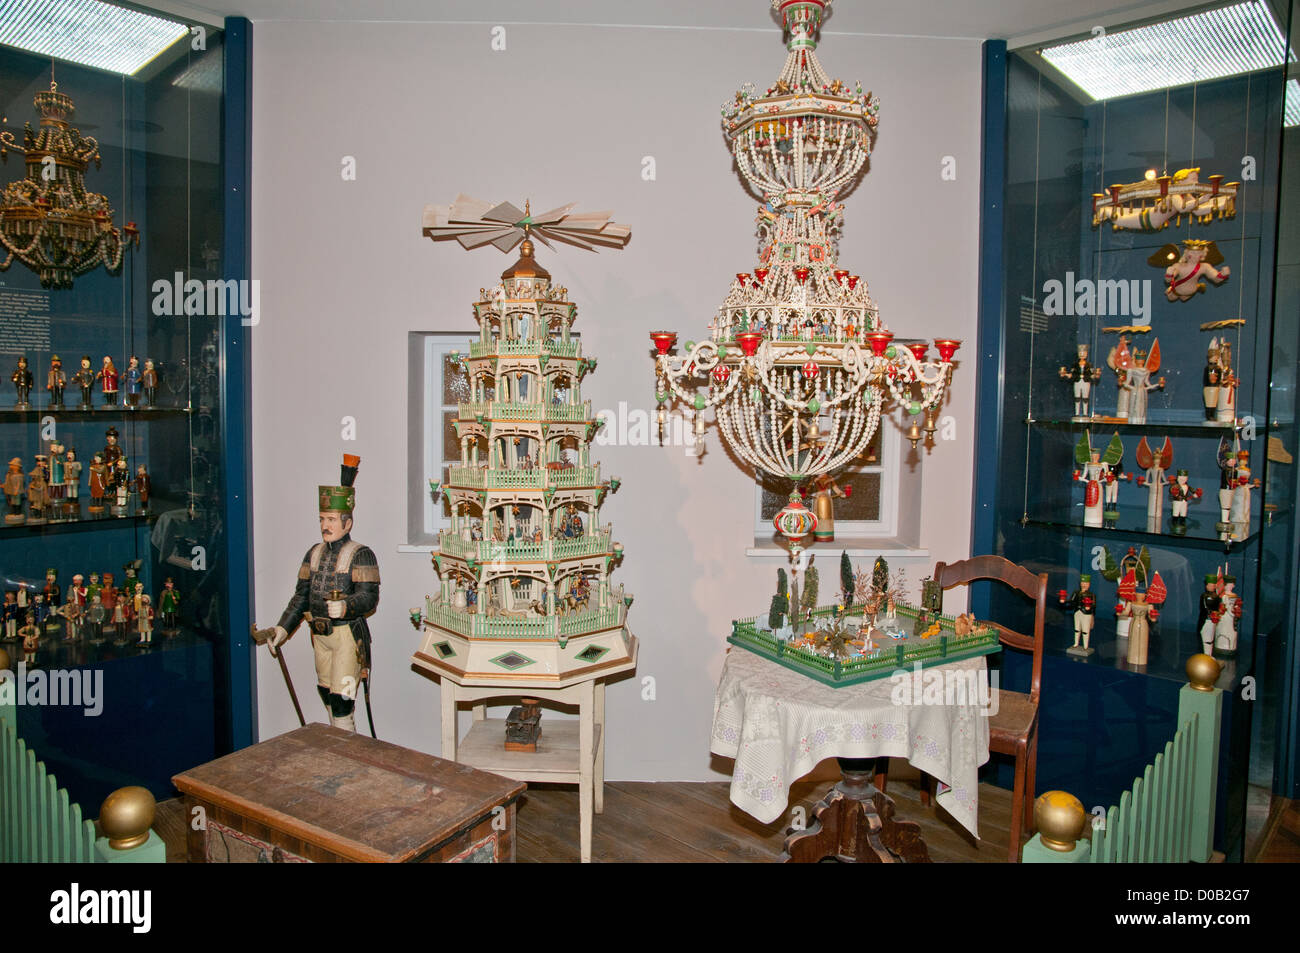 Erzgebirge woodcraft on display in Seiffen Toy Museum Seiffen, Ore Mountains, Saxony, Germany Stock Photo